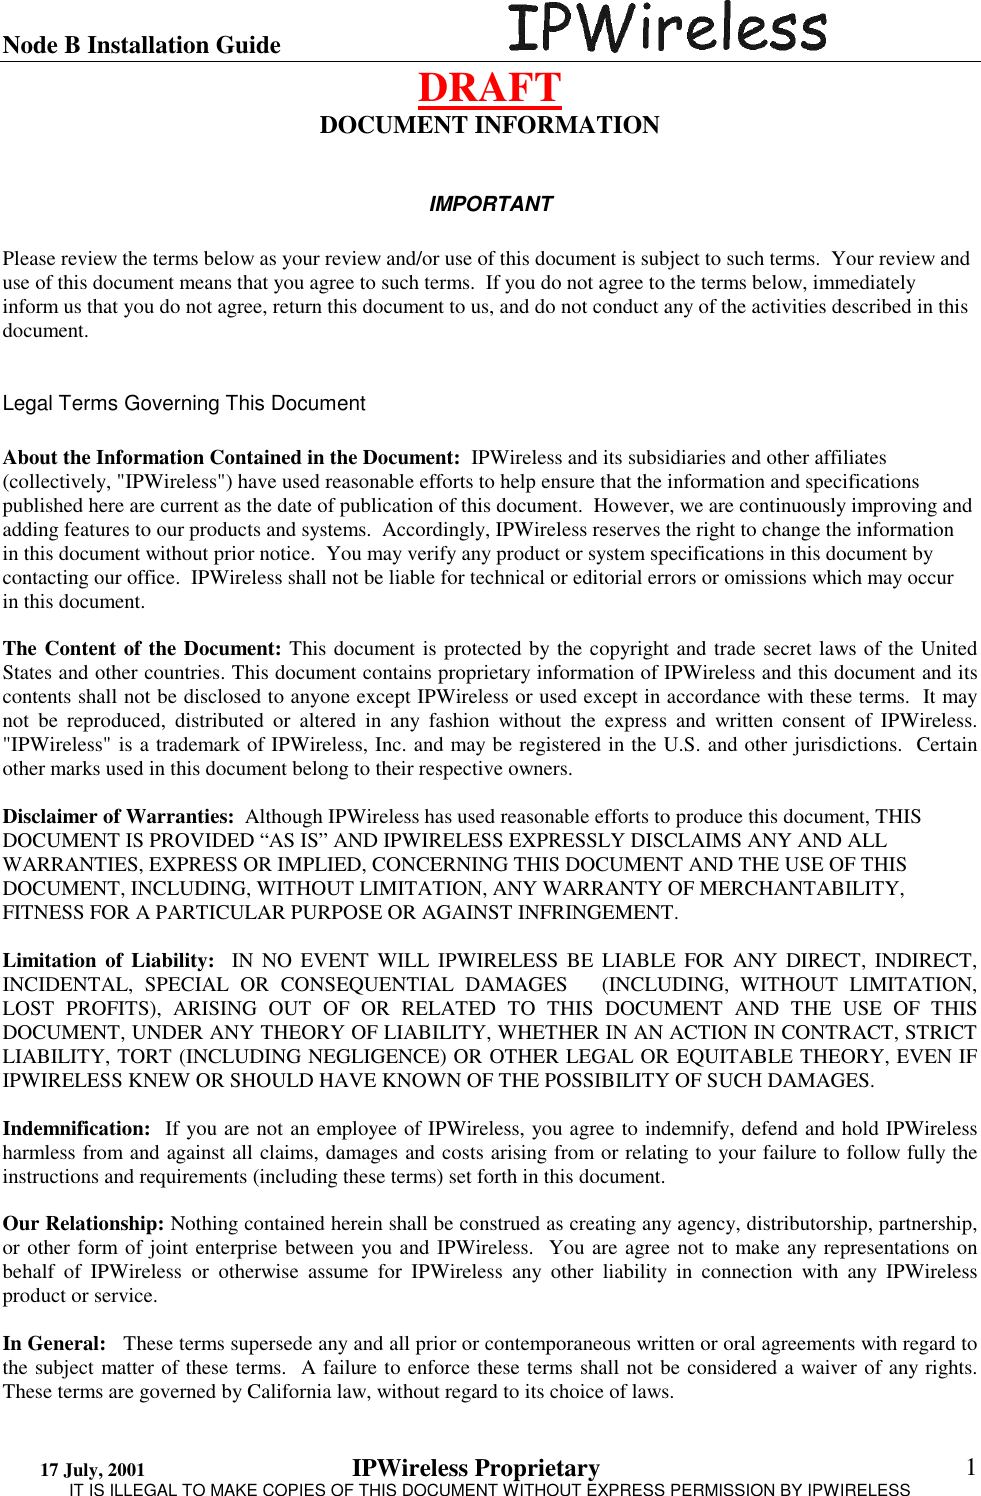 Node B Installation Guide                                      DRAFT 17 July, 2001                                 IPWireless Proprietary                                                  IT IS ILLEGAL TO MAKE COPIES OF THIS DOCUMENT WITHOUT EXPRESS PERMISSION BY IPWIRELESS  1 DOCUMENT INFORMATION  IMPORTANT  Please review the terms below as your review and/or use of this document is subject to such terms.  Your review and use of this document means that you agree to such terms.  If you do not agree to the terms below, immediately inform us that you do not agree, return this document to us, and do not conduct any of the activities described in this document.     Legal Terms Governing This Document  About the Information Contained in the Document:  IPWireless and its subsidiaries and other affiliates (collectively, &quot;IPWireless&quot;) have used reasonable efforts to help ensure that the information and specifications published here are current as the date of publication of this document.  However, we are continuously improving and adding features to our products and systems.  Accordingly, IPWireless reserves the right to change the information in this document without prior notice.  You may verify any product or system specifications in this document by contacting our office.  IPWireless shall not be liable for technical or editorial errors or omissions which may occur in this document.    The Content of the Document: This document is protected by the copyright and trade secret laws of the United States and other countries. This document contains proprietary information of IPWireless and this document and its contents shall not be disclosed to anyone except IPWireless or used except in accordance with these terms.  It may not be reproduced, distributed or altered in any fashion without the express and written consent of IPWireless.  &quot;IPWireless&quot; is a trademark of IPWireless, Inc. and may be registered in the U.S. and other jurisdictions.  Certain other marks used in this document belong to their respective owners.  Disclaimer of Warranties:  Although IPWireless has used reasonable efforts to produce this document, THIS DOCUMENT IS PROVIDED “AS IS” AND IPWIRELESS EXPRESSLY DISCLAIMS ANY AND ALL WARRANTIES, EXPRESS OR IMPLIED, CONCERNING THIS DOCUMENT AND THE USE OF THIS DOCUMENT, INCLUDING, WITHOUT LIMITATION, ANY WARRANTY OF MERCHANTABILITY, FITNESS FOR A PARTICULAR PURPOSE OR AGAINST INFRINGEMENT.   Limitation of Liability:  IN NO EVENT WILL IPWIRELESS BE LIABLE FOR ANY DIRECT, INDIRECT, INCIDENTAL, SPECIAL OR CONSEQUENTIAL DAMAGES   (INCLUDING, WITHOUT LIMITATION, LOST PROFITS), ARISING OUT OF OR RELATED TO THIS DOCUMENT AND THE USE OF THIS DOCUMENT, UNDER ANY THEORY OF LIABILITY, WHETHER IN AN ACTION IN CONTRACT, STRICT LIABILITY, TORT (INCLUDING NEGLIGENCE) OR OTHER LEGAL OR EQUITABLE THEORY, EVEN IF IPWIRELESS KNEW OR SHOULD HAVE KNOWN OF THE POSSIBILITY OF SUCH DAMAGES.  Indemnification:  If you are not an employee of IPWireless, you agree to indemnify, defend and hold IPWireless harmless from and against all claims, damages and costs arising from or relating to your failure to follow fully the instructions and requirements (including these terms) set forth in this document.   Our Relationship: Nothing contained herein shall be construed as creating any agency, distributorship, partnership, or other form of joint enterprise between you and IPWireless.  You are agree not to make any representations on behalf of IPWireless or otherwise assume for IPWireless any other liability in connection with any IPWireless product or service.  In General:   These terms supersede any and all prior or contemporaneous written or oral agreements with regard to the subject matter of these terms.  A failure to enforce these terms shall not be considered a waiver of any rights.  These terms are governed by California law, without regard to its choice of laws. 